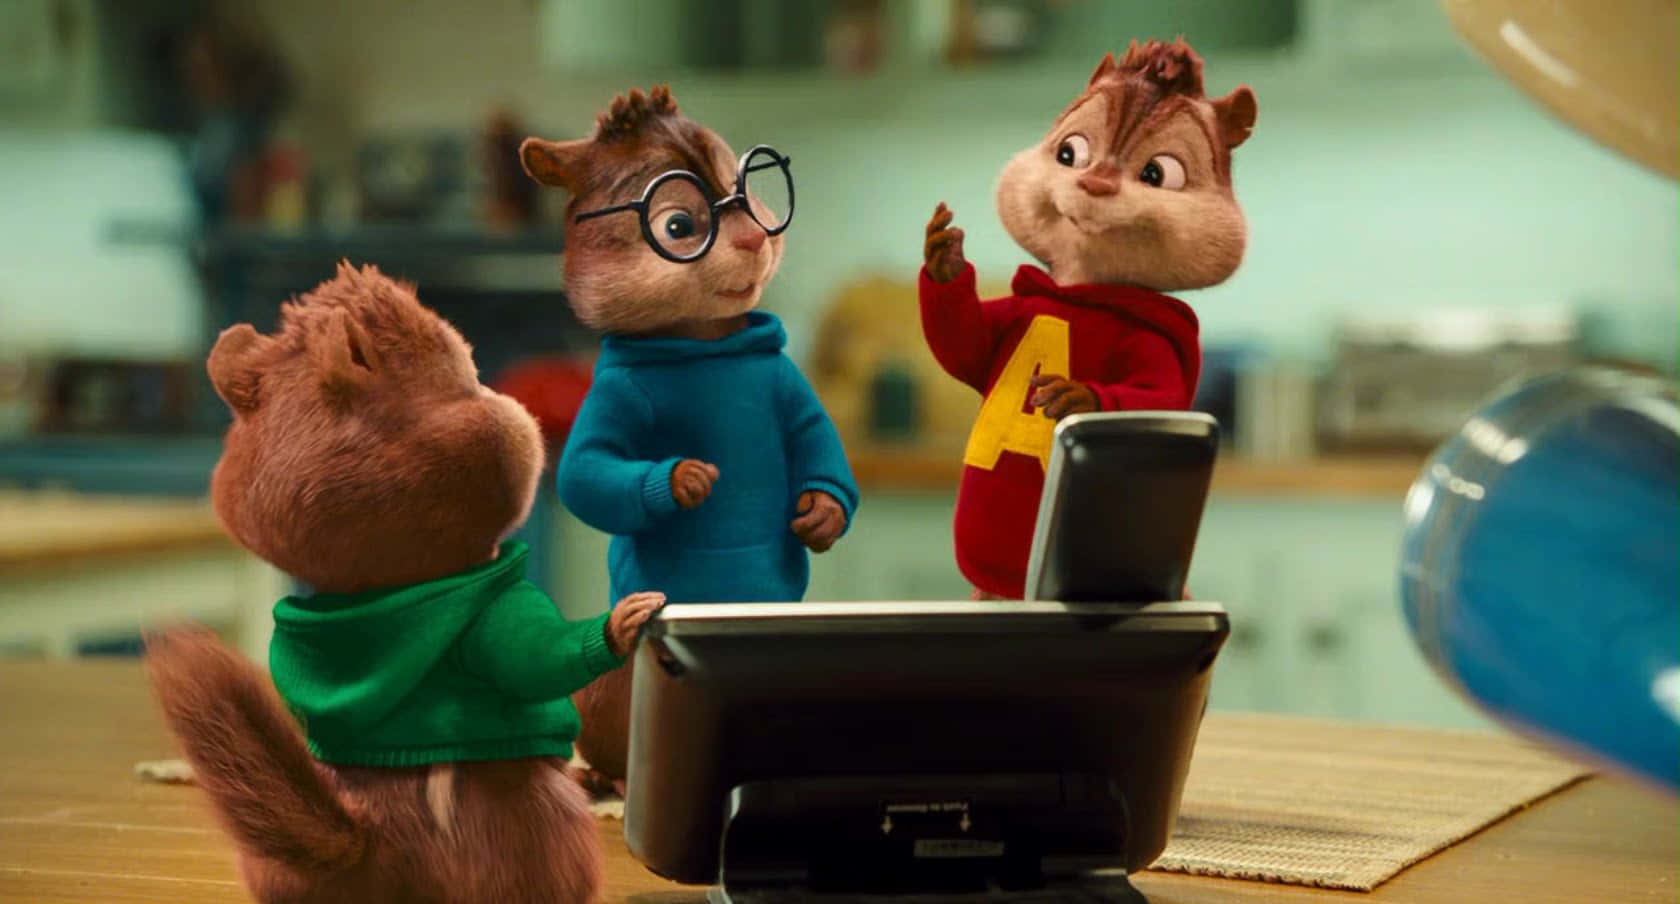 Join Alvin and The Chipmunks on a musical adventure!